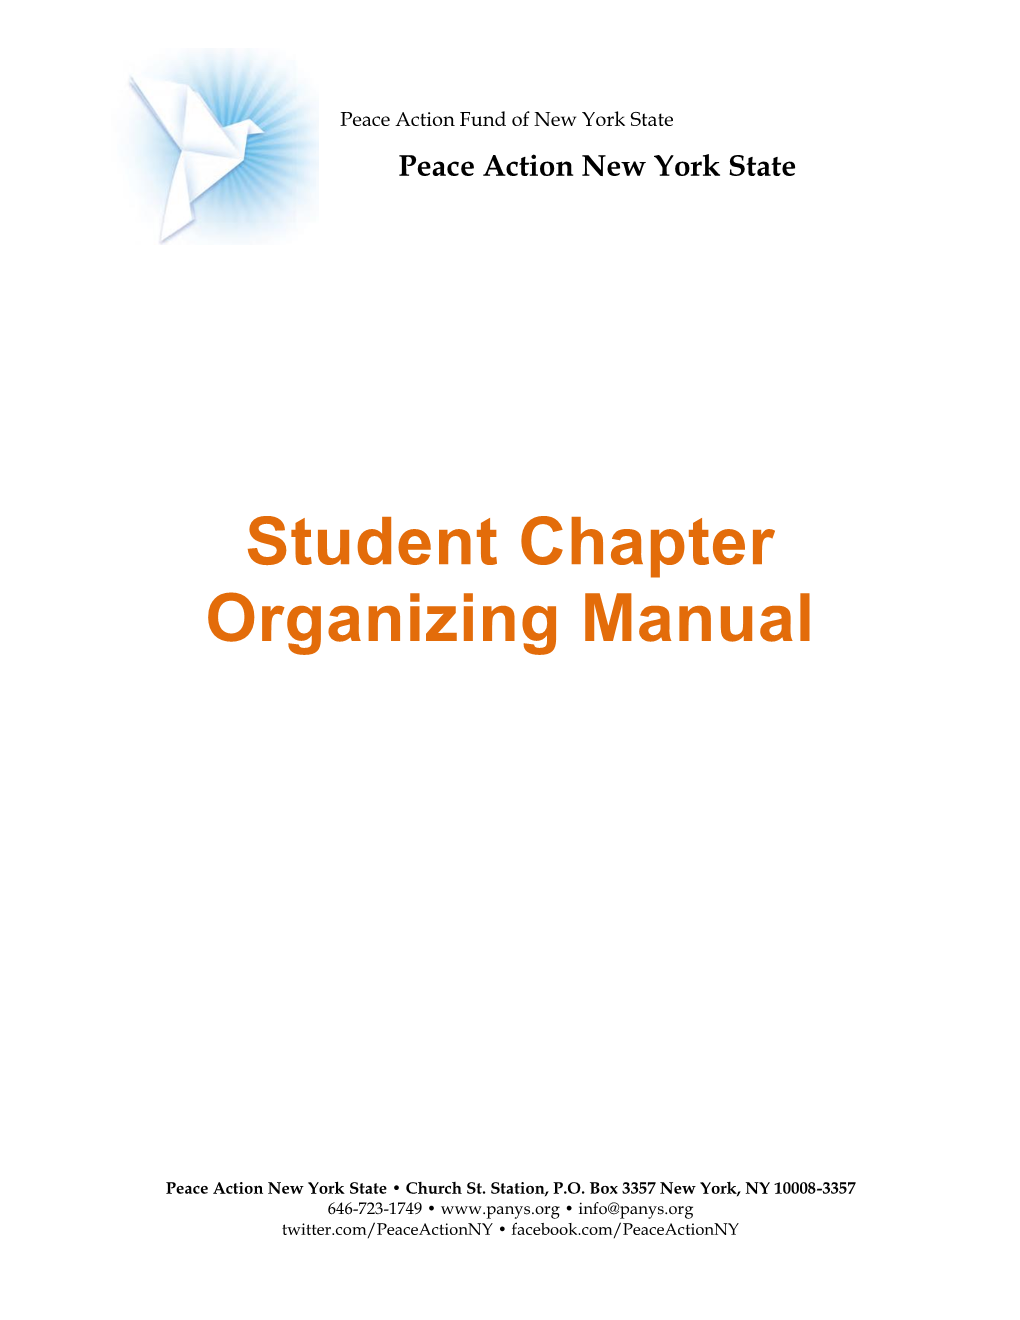 Student Chapter Organizing Manual